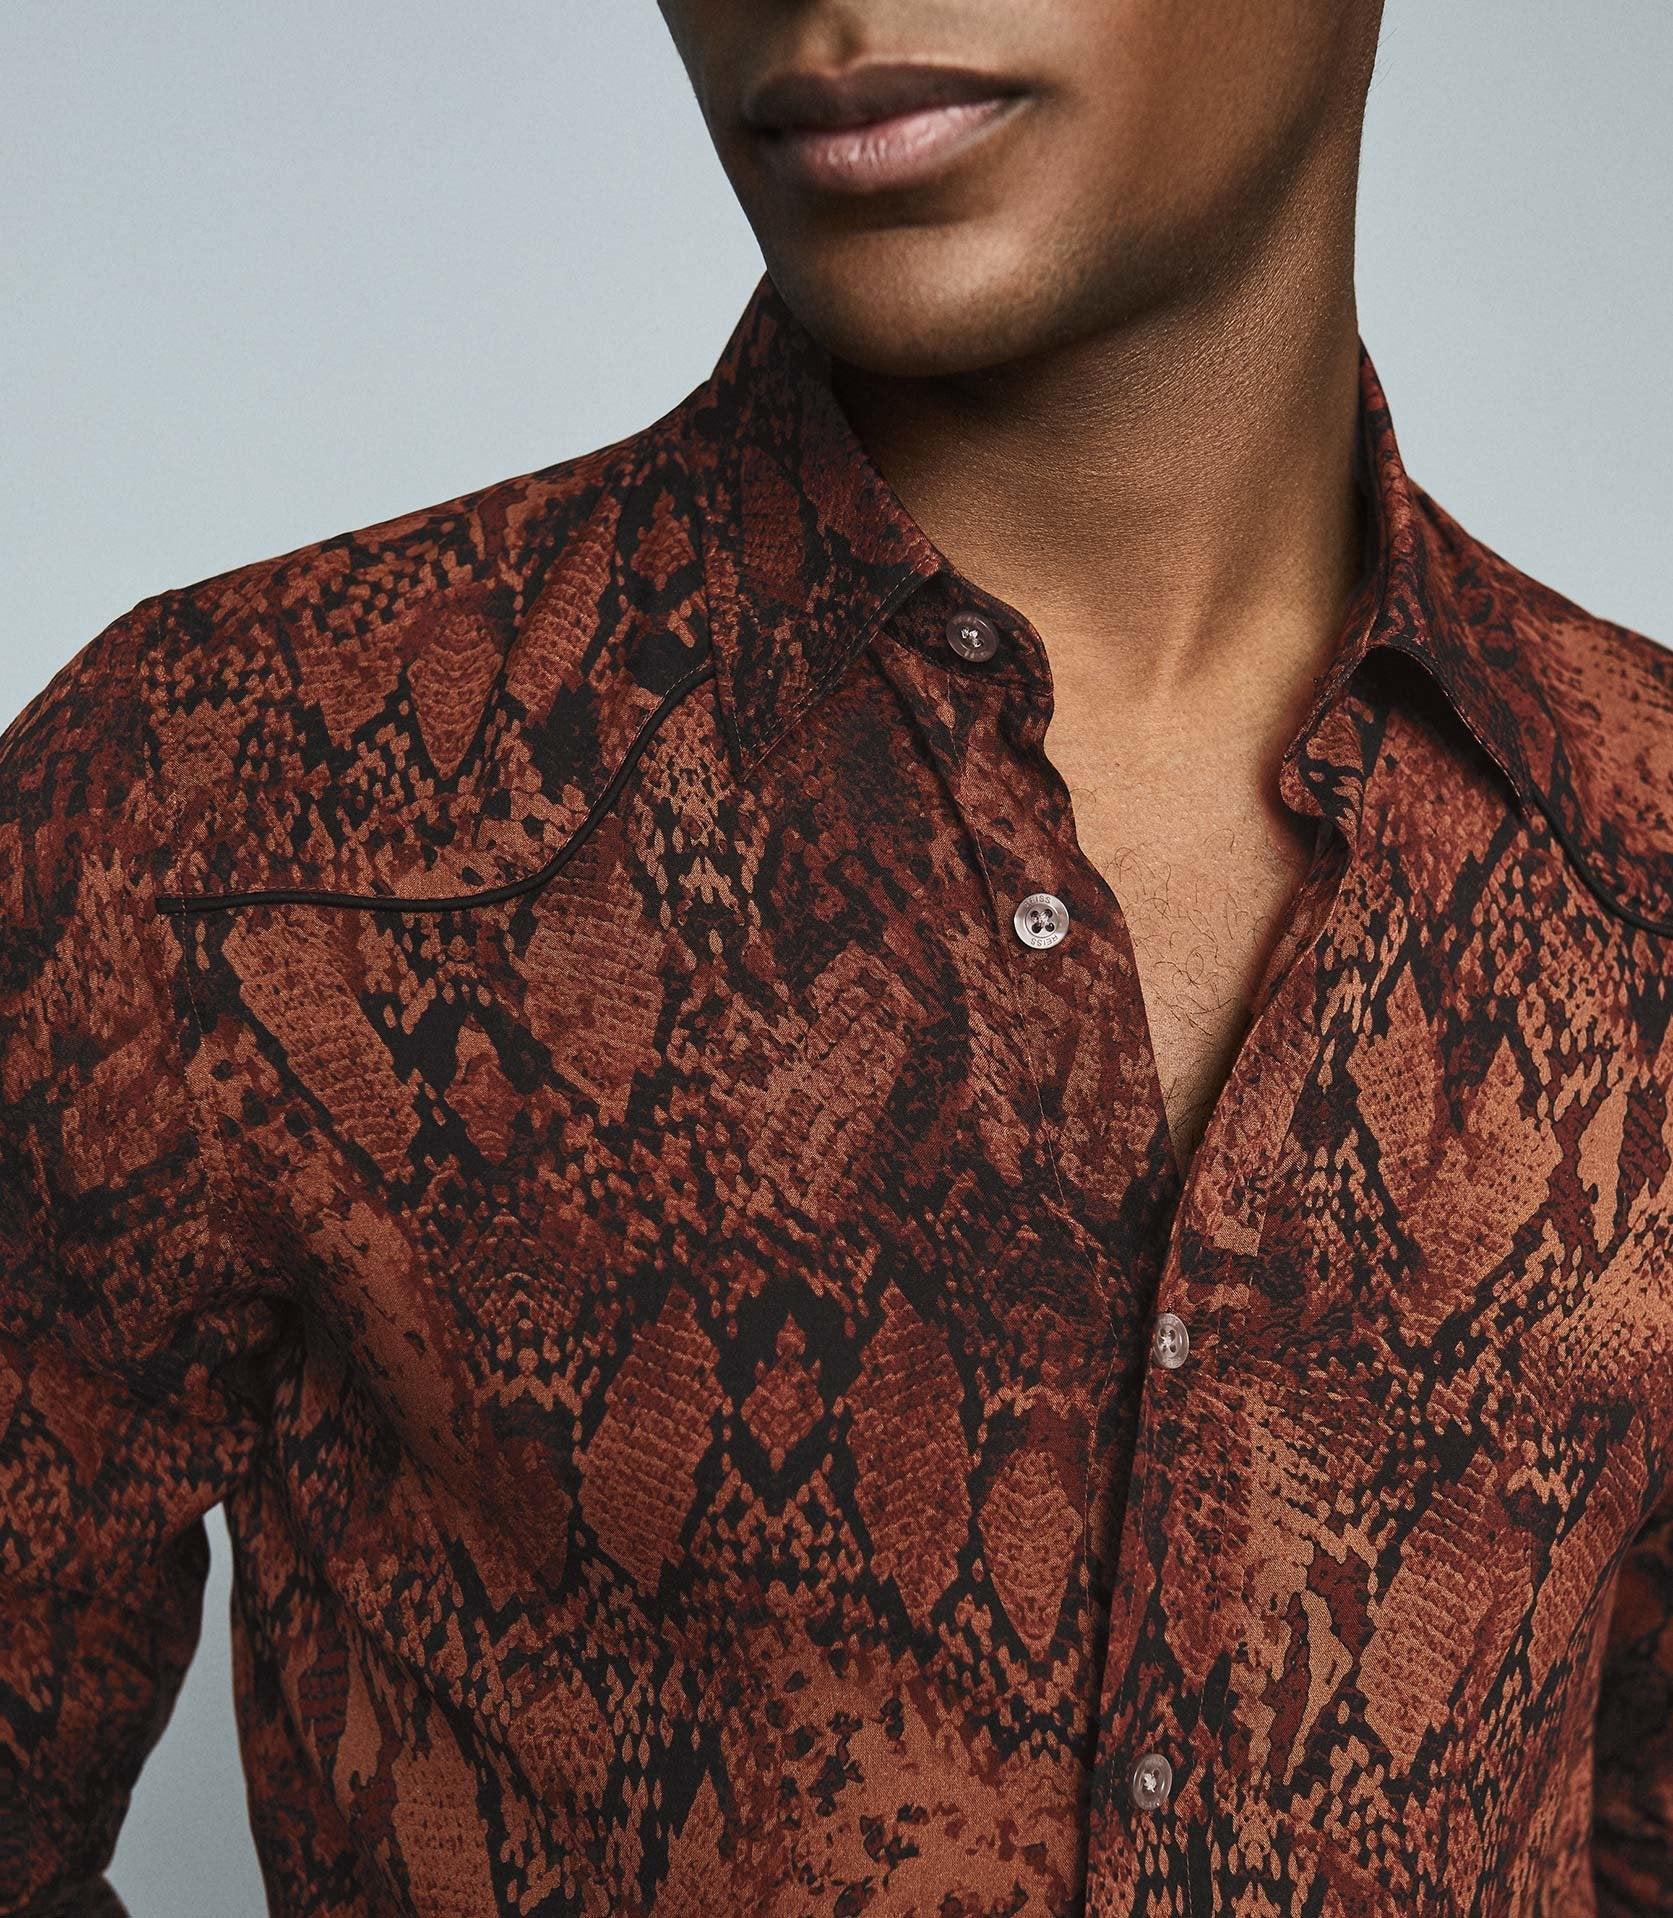 Reiss Leather Adder - Snake Printed Shirt in Tan (Brown) for Men - Lyst